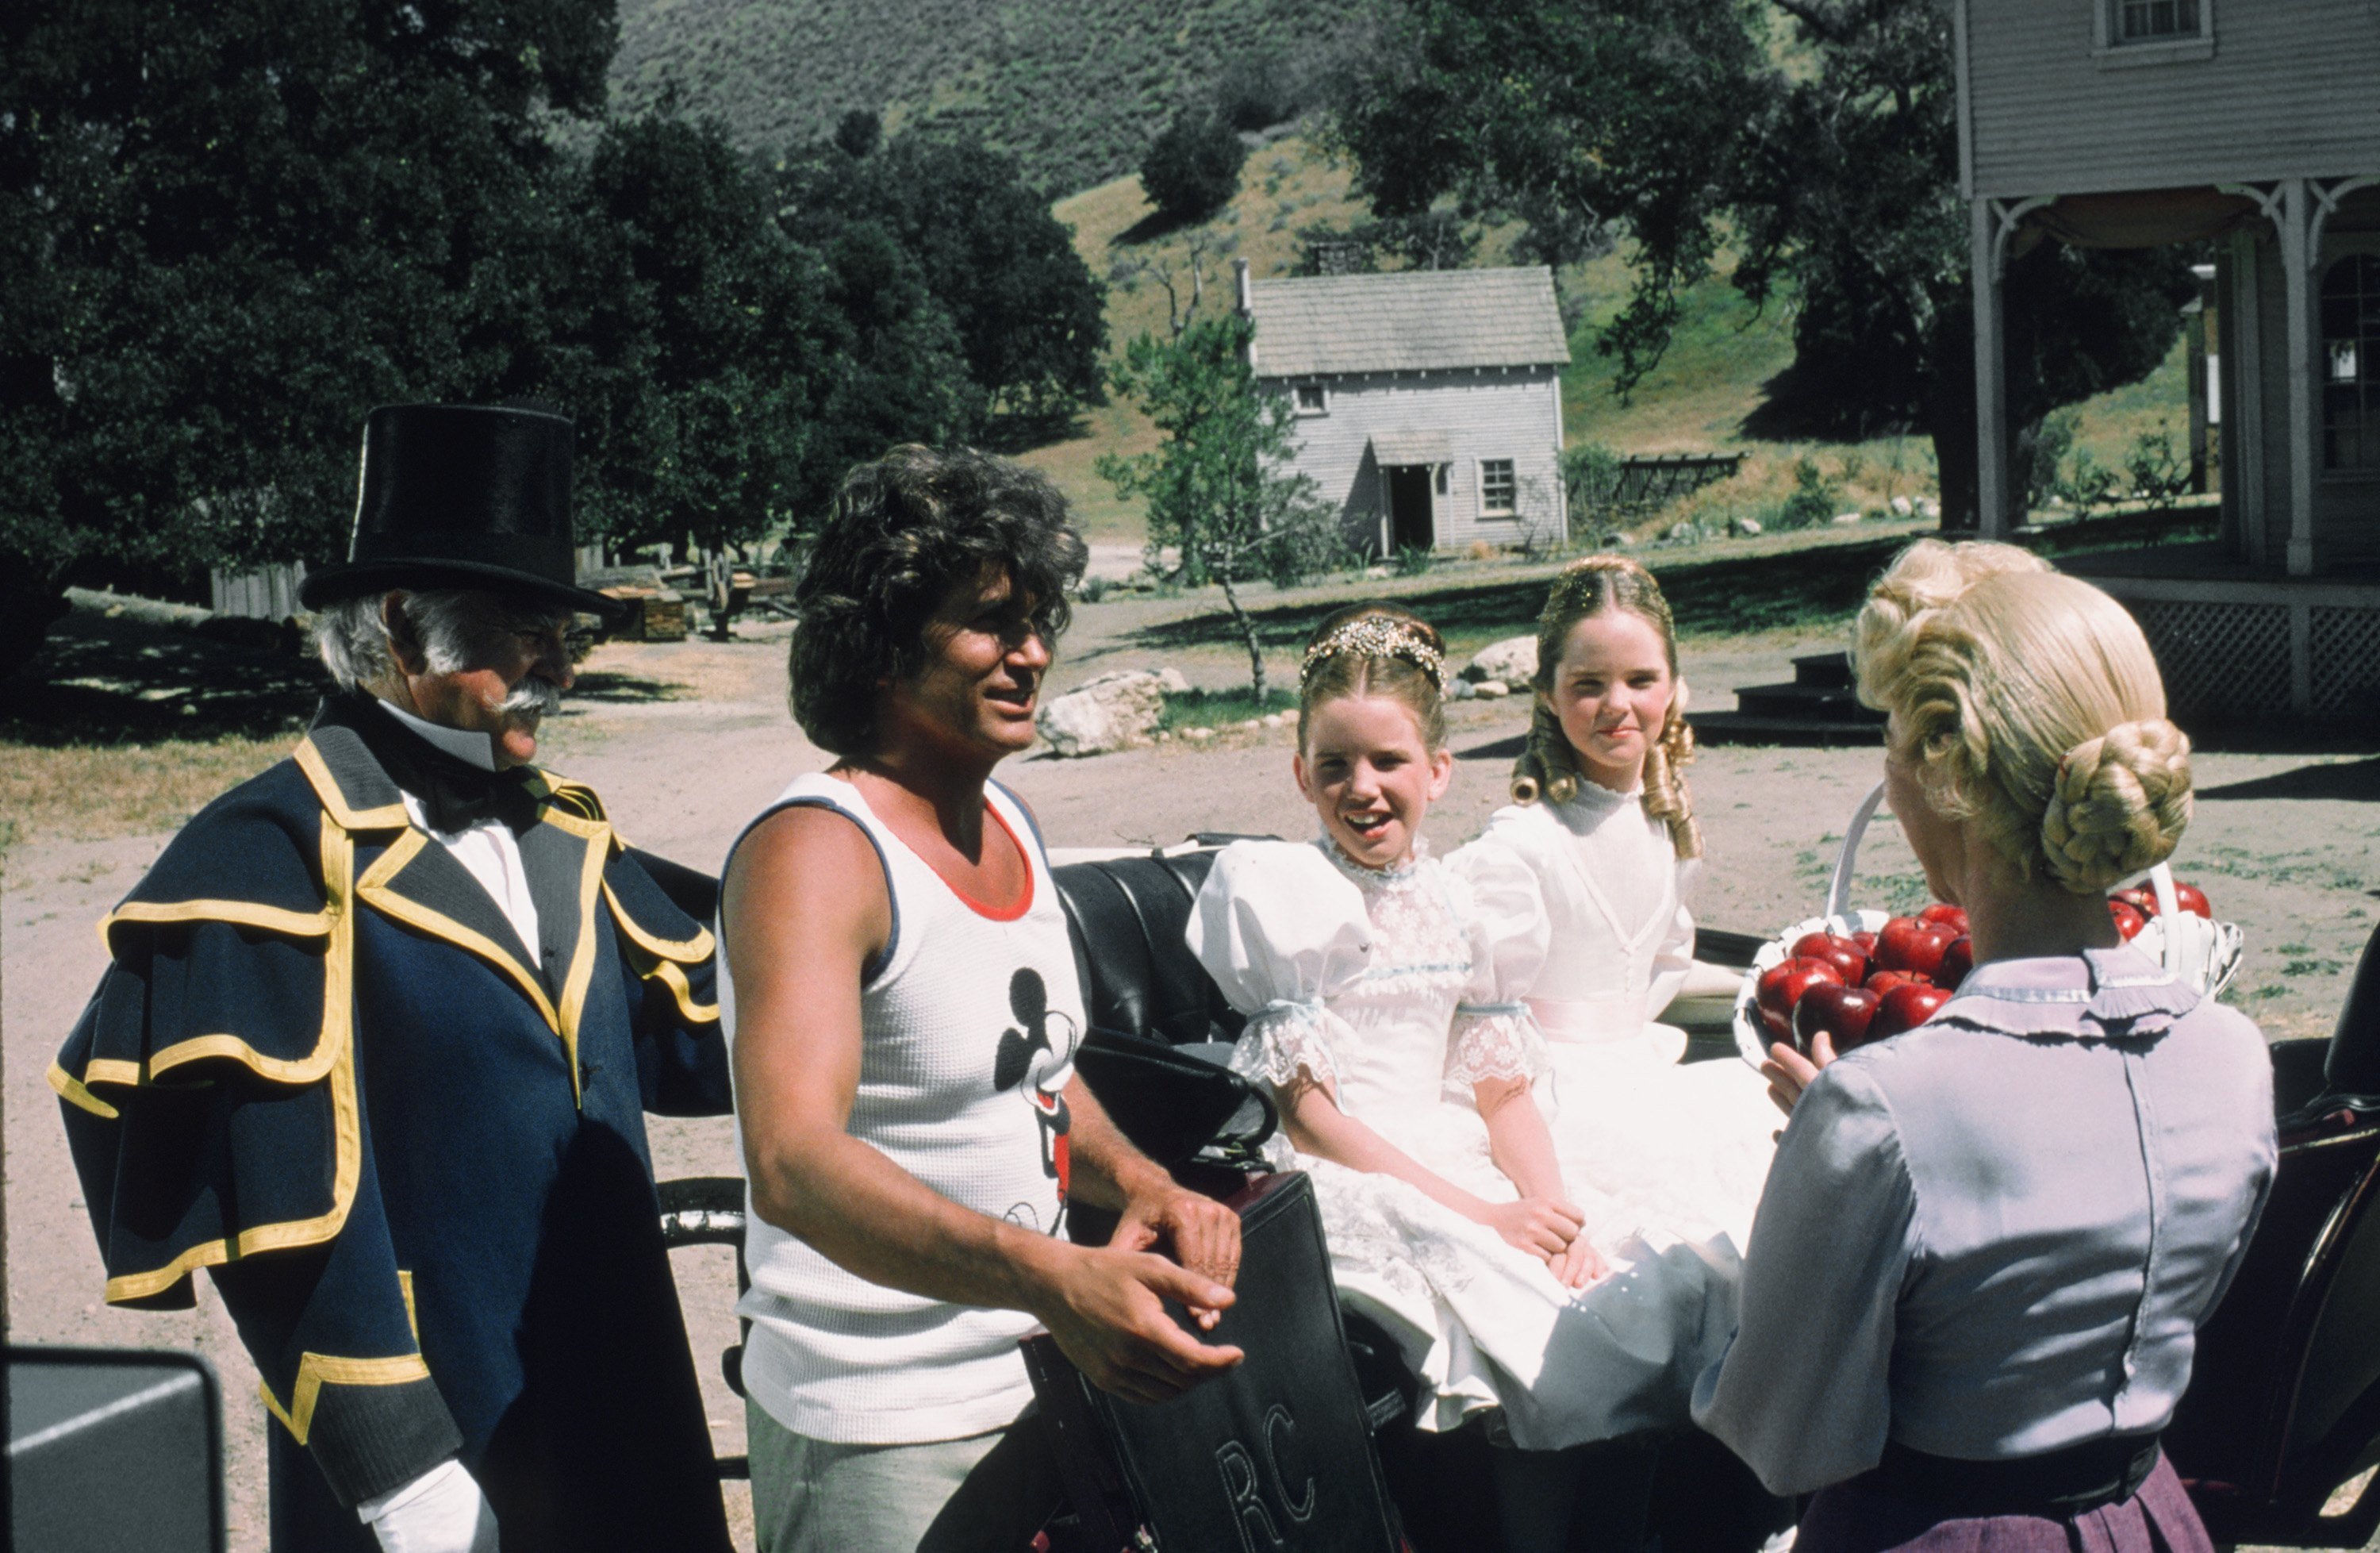 Michael Landon on the set of 'Little House on the Prairie' with cast, 1975